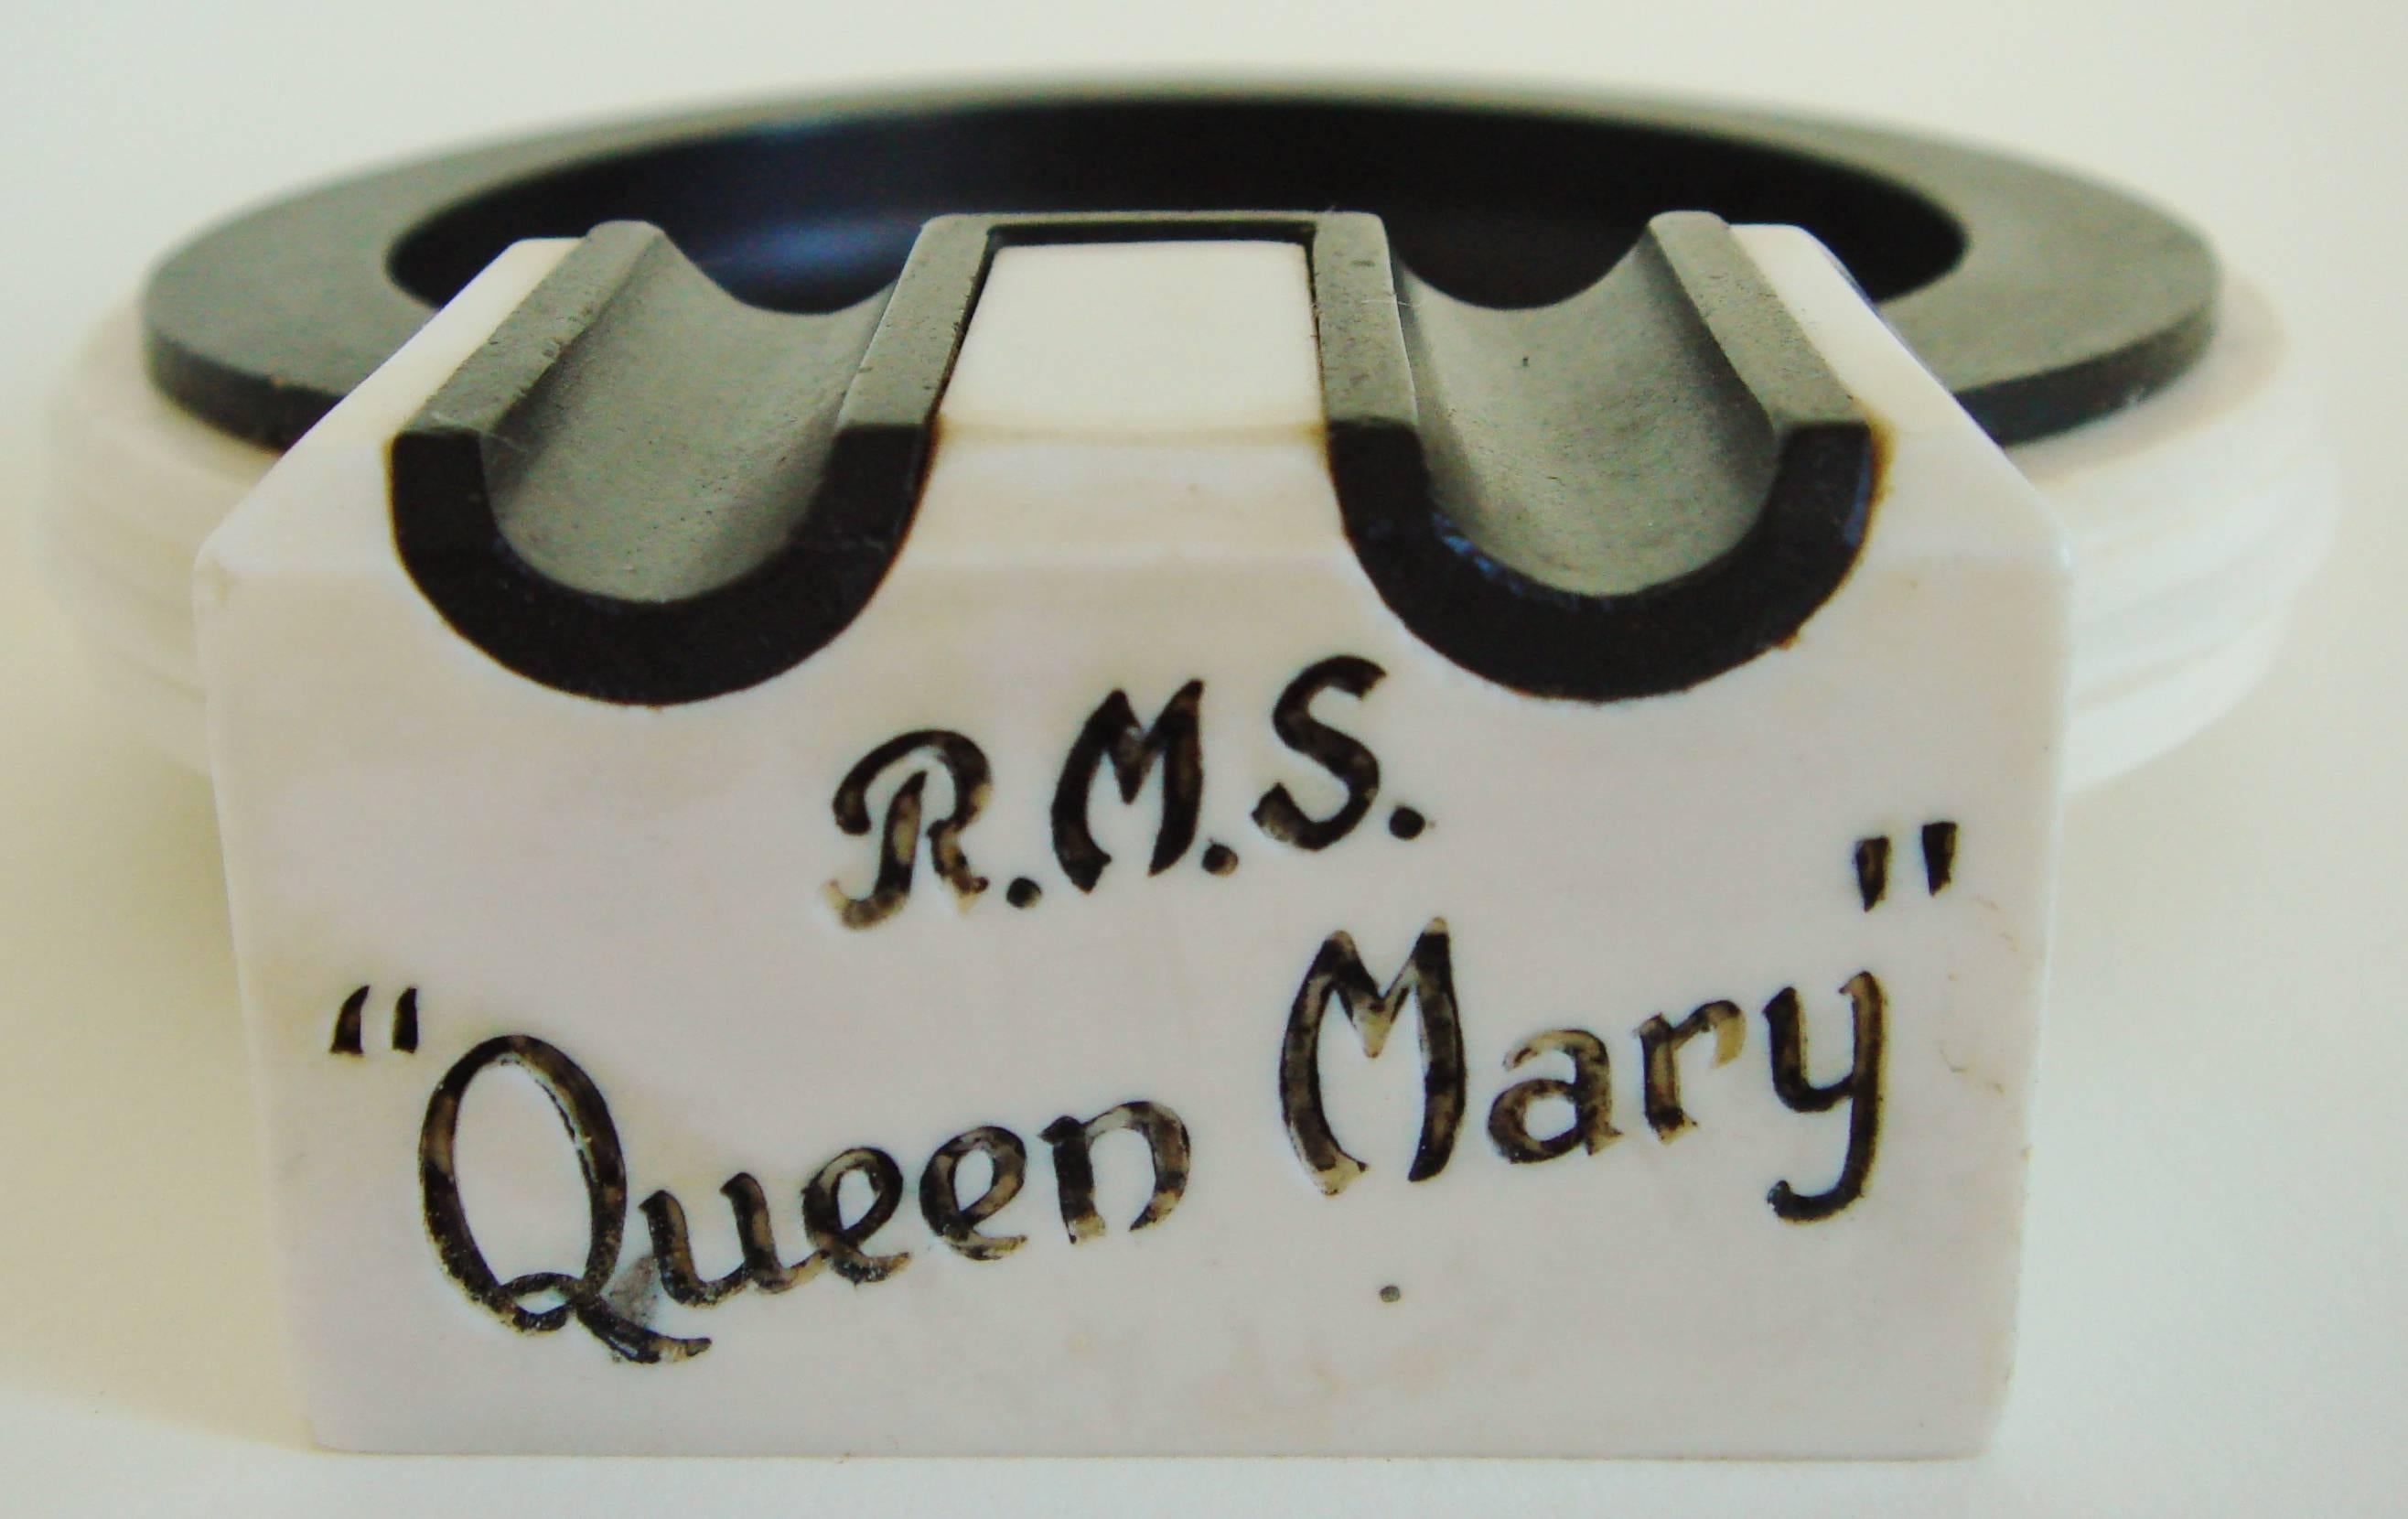 This rare pair of British Art Deco black bakelite and white phenolic resin ashtrays were made for the launch of the RMS Queen Mary in 1936. These models with 